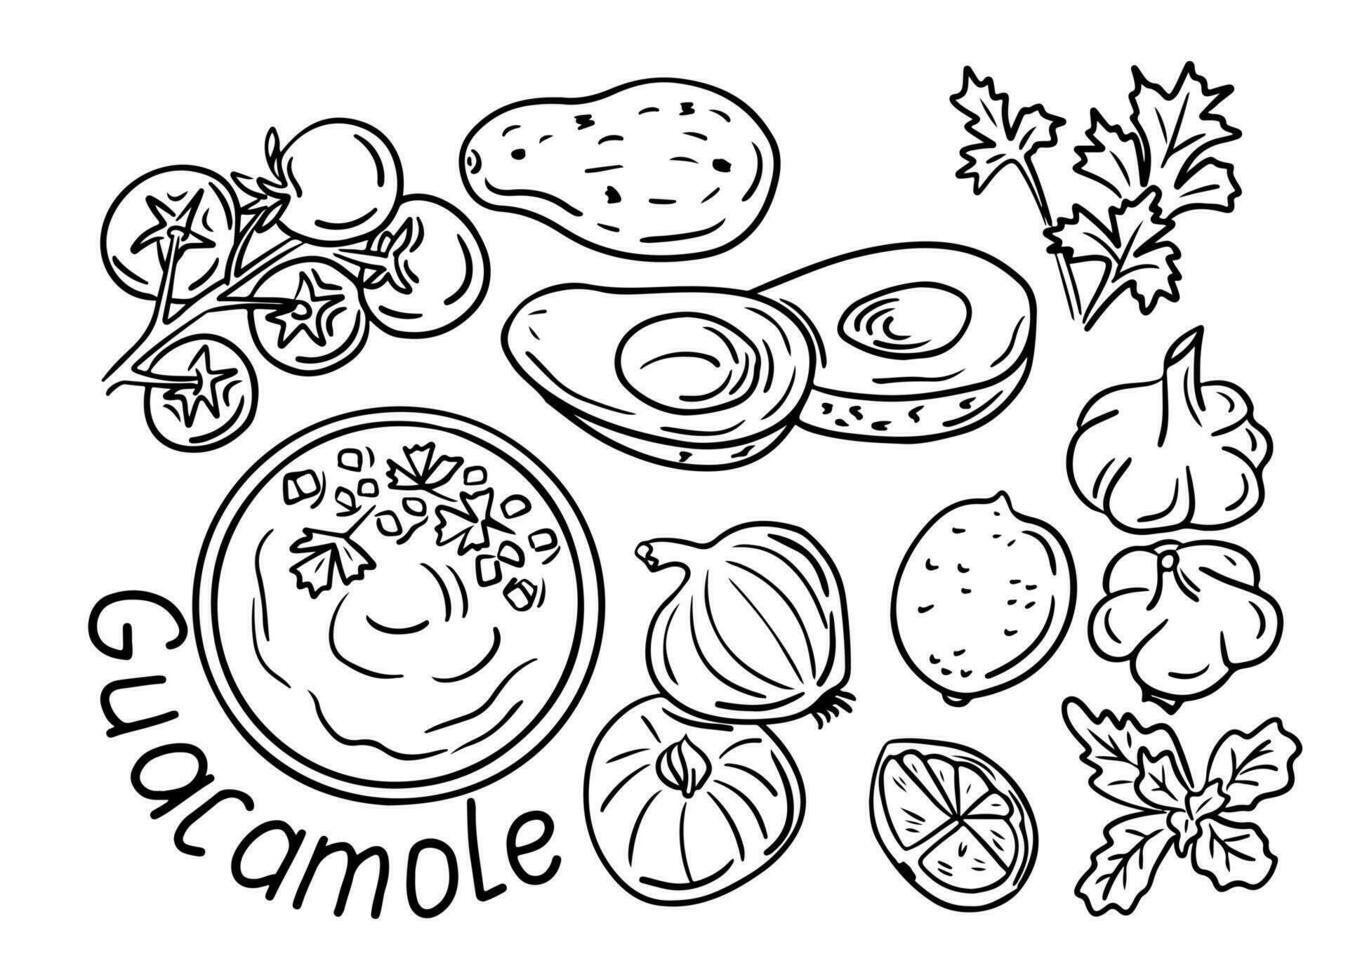 Guacamole ingredients doodle set. Food illustration. Sketch contour hand drawn vegetables, lettering and mexicans meal. Ideal for coloring pages, tattoo, pattern vector